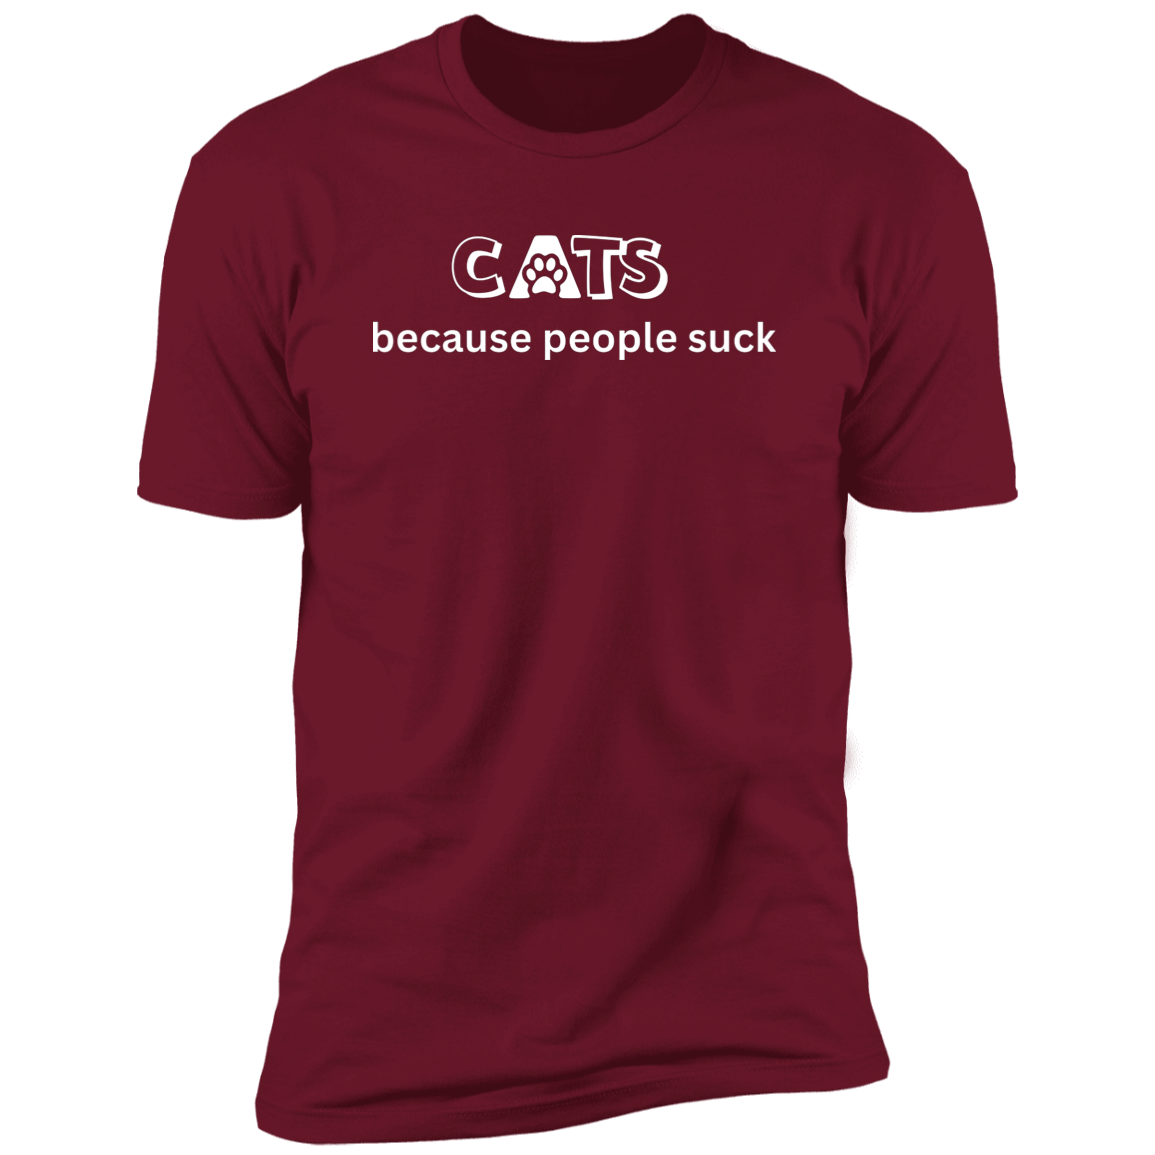 Cats Because People Suck T-shirt, Cat Shirt for humans, in cardinal red